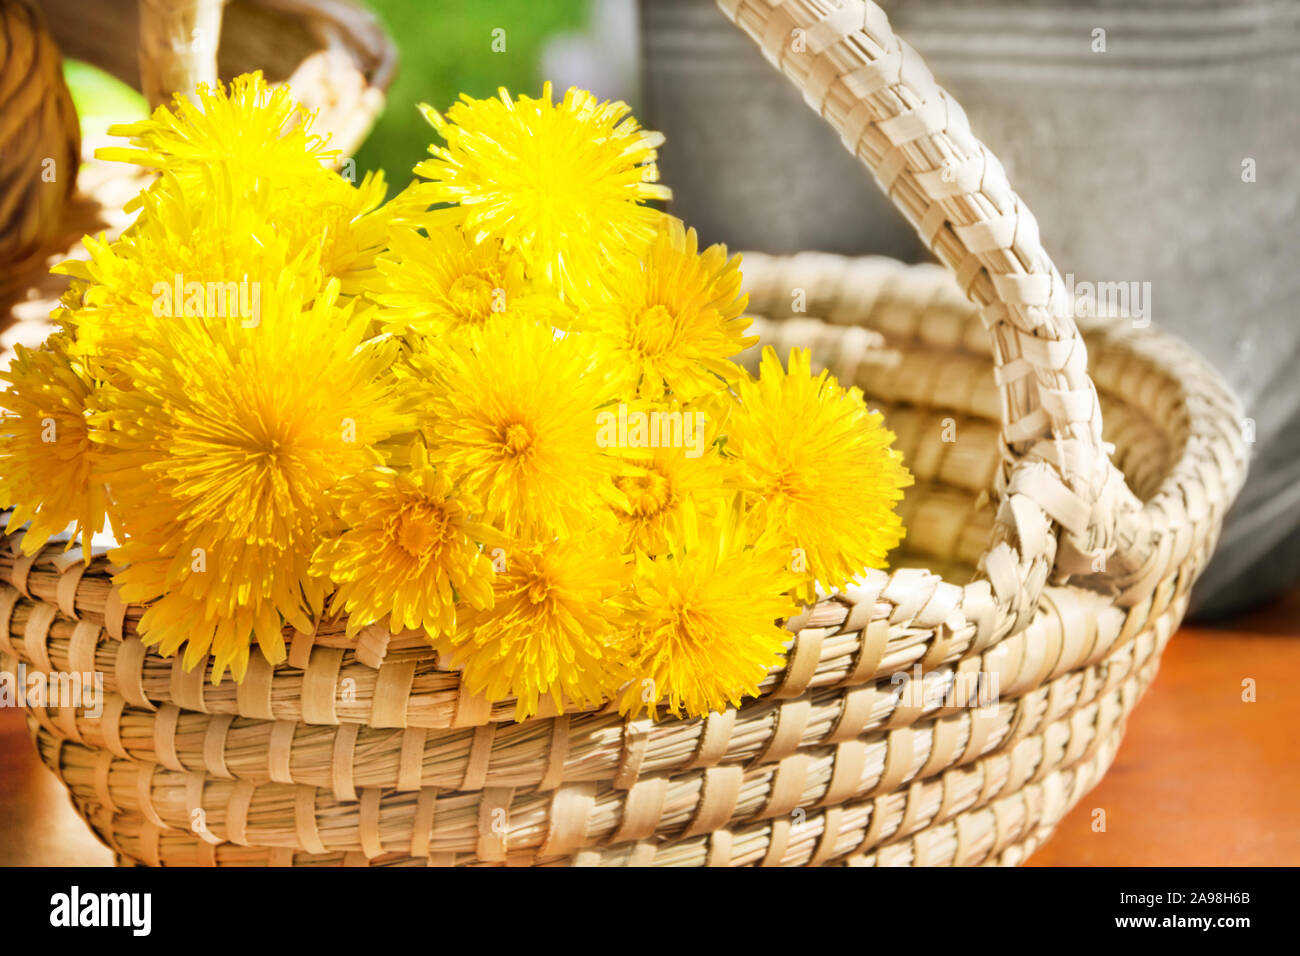 Dandelion and basket close up Stock Photo